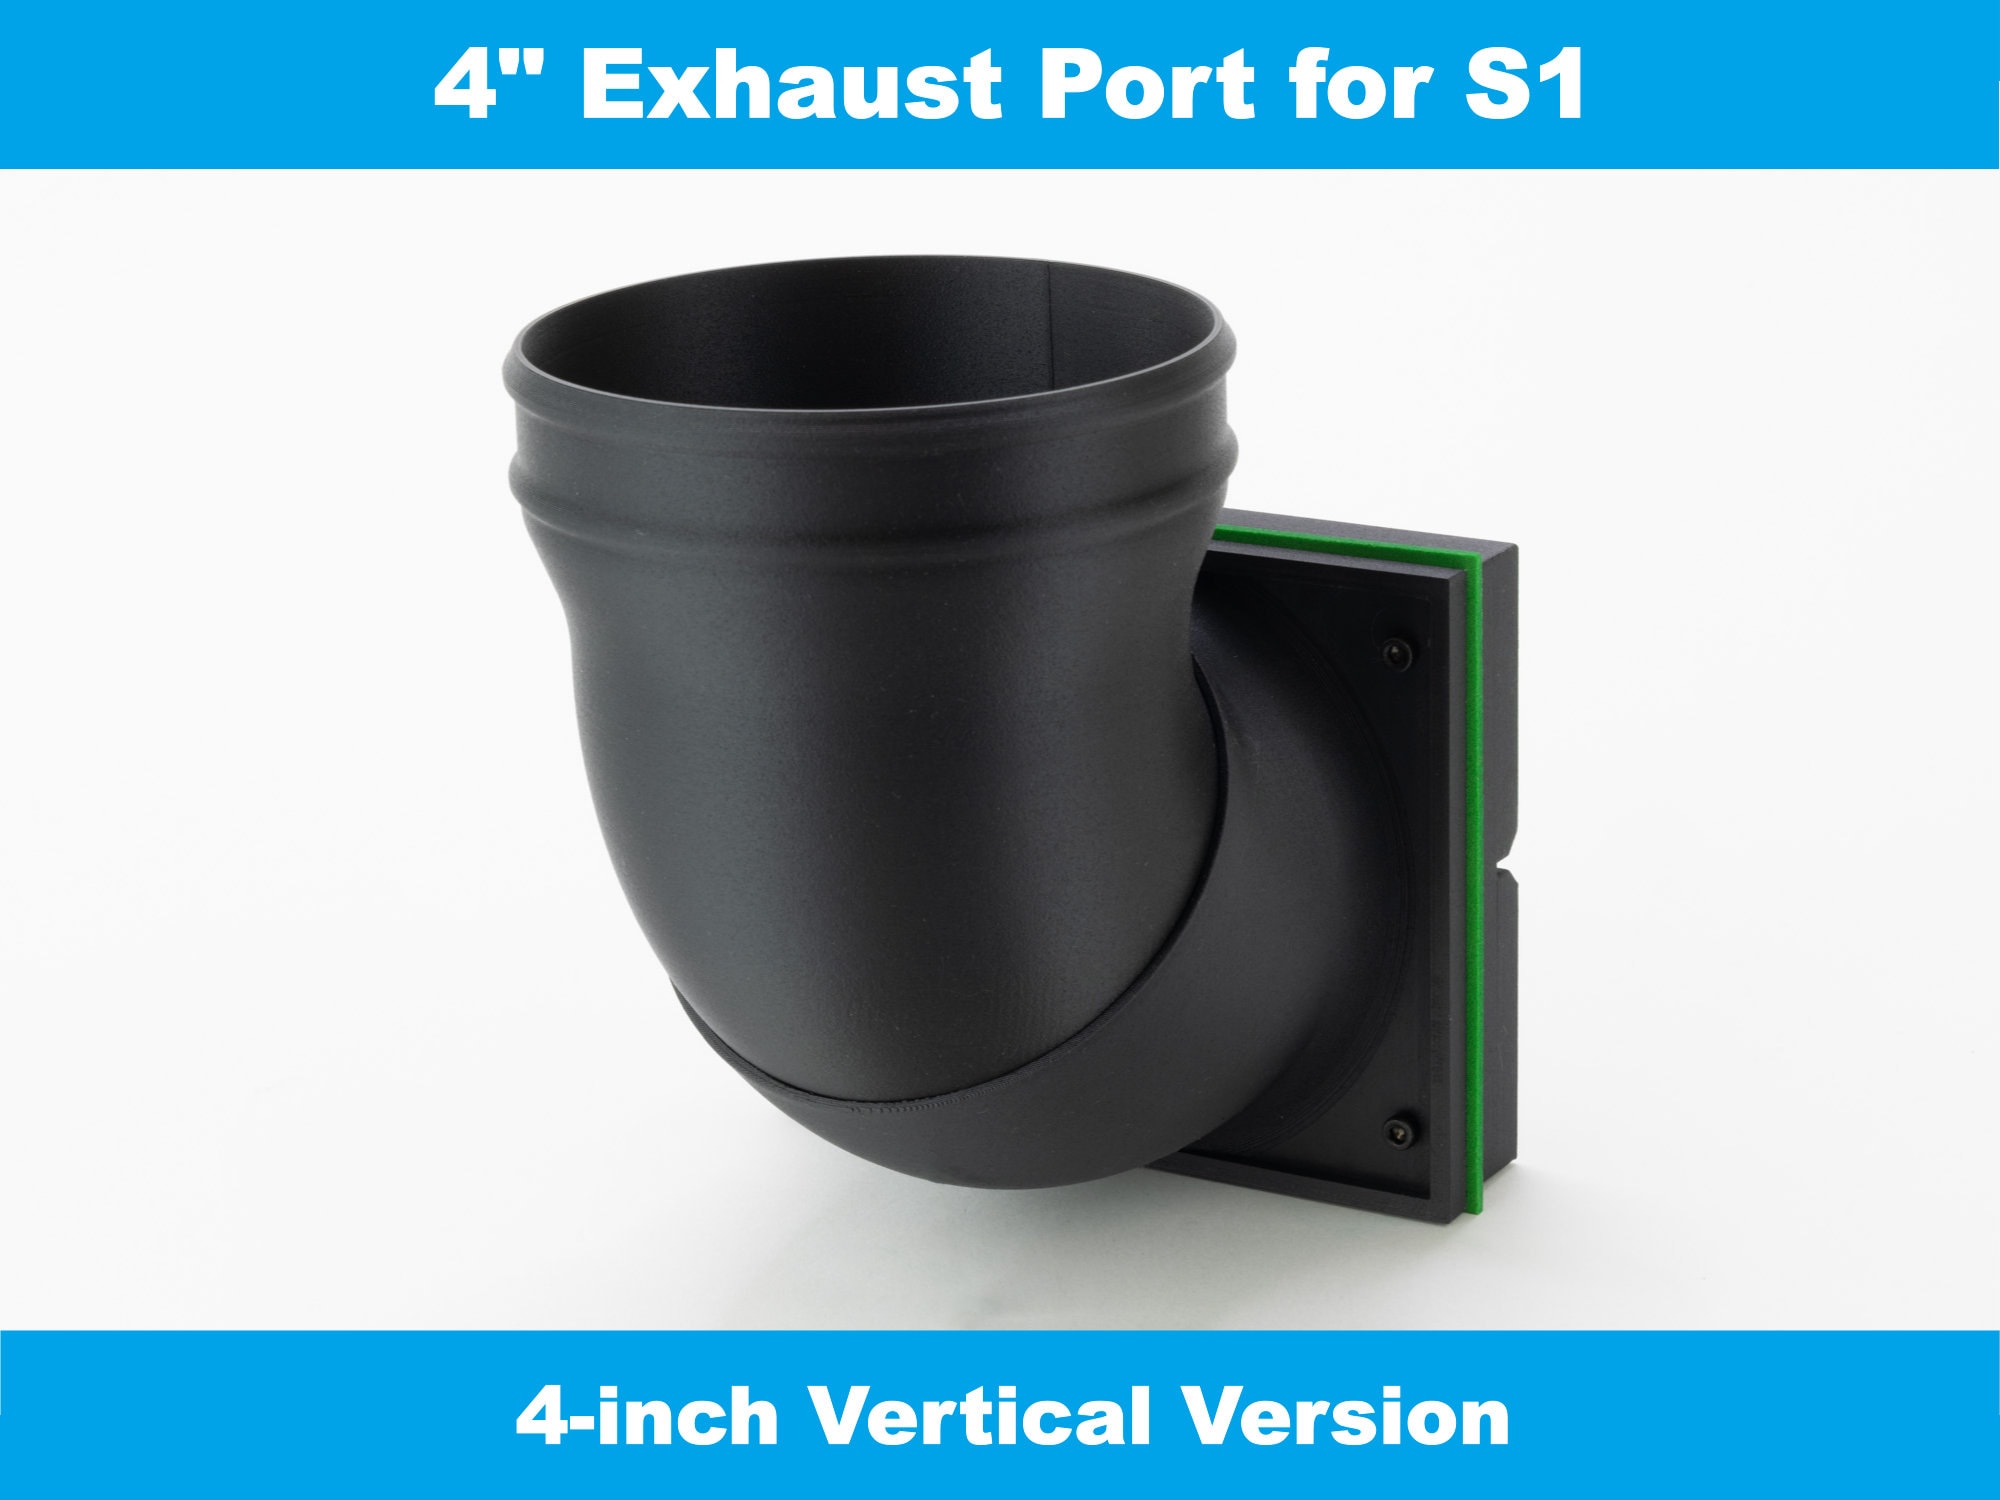 XTool S1 (Flange) To 4 Inch (101mm) Hose Adapter – Embrace Making